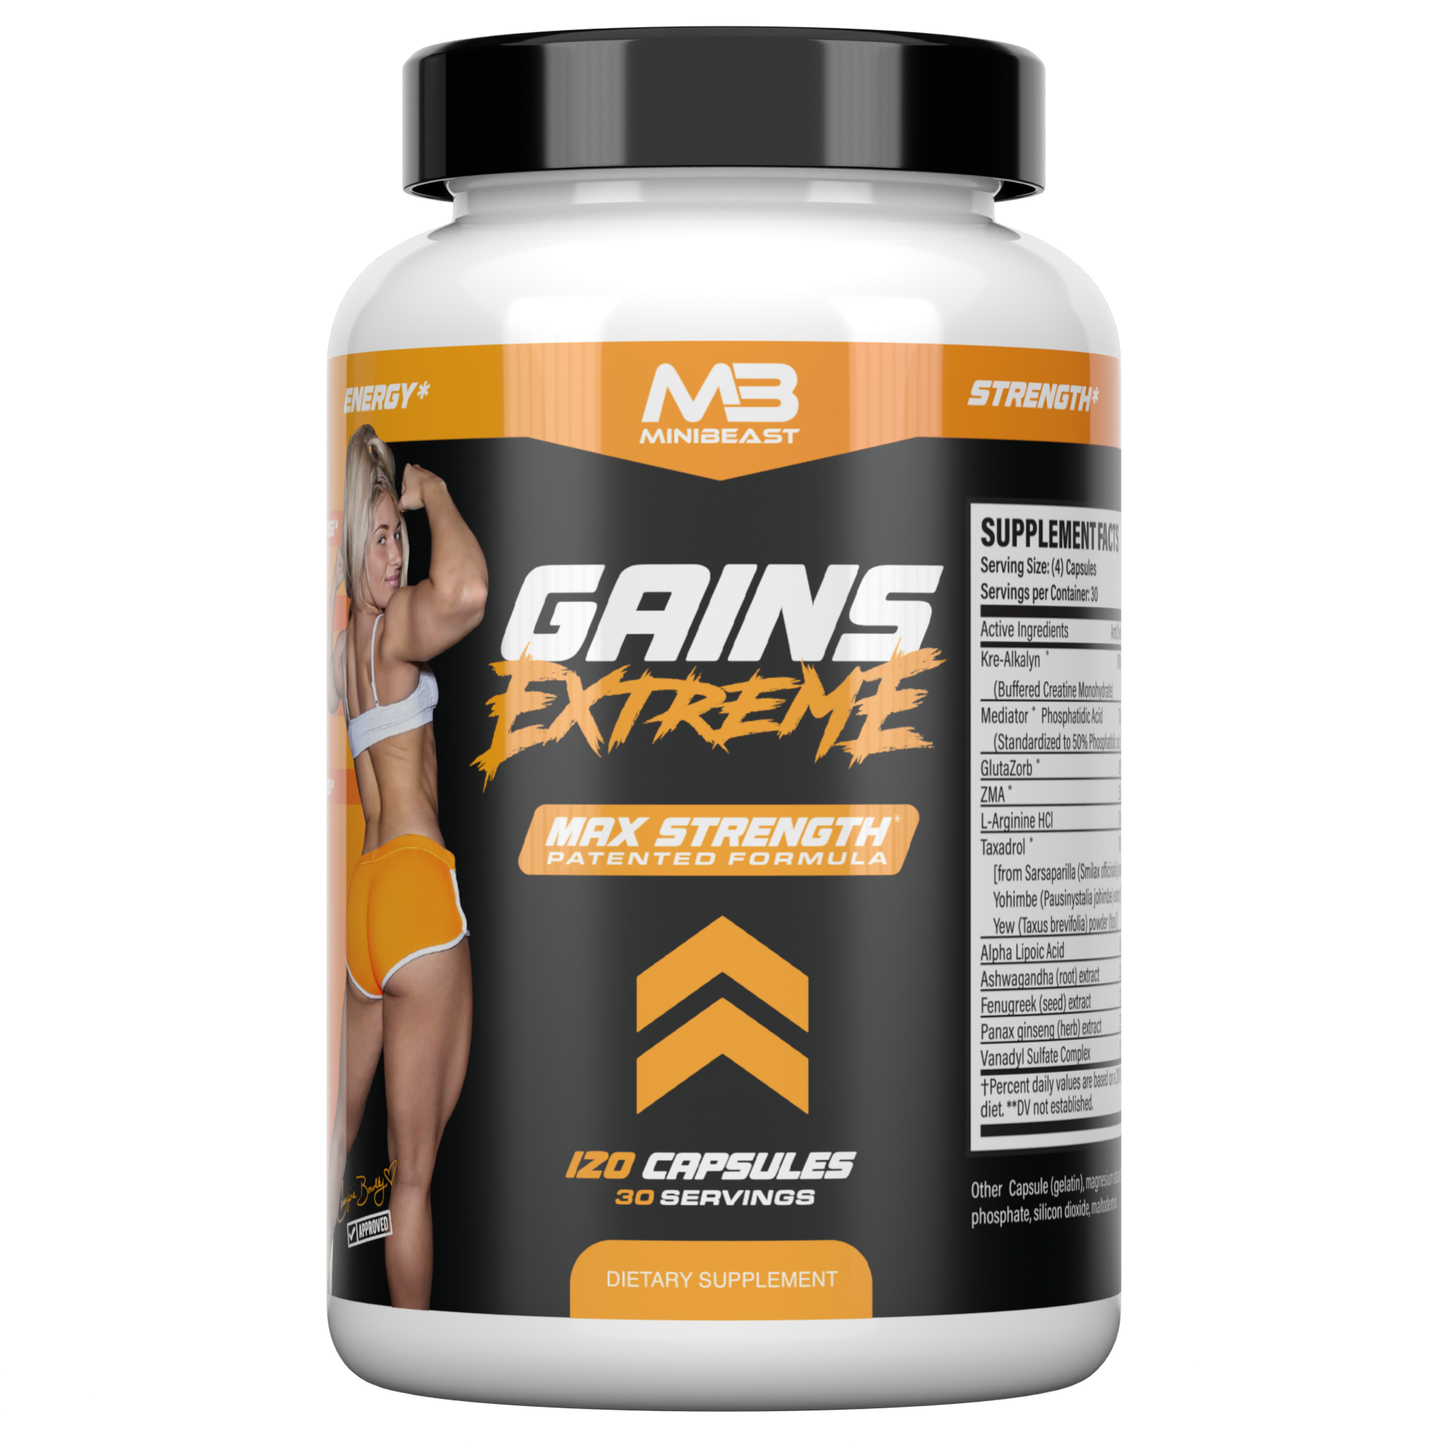 Gains Extreme (Muscle Builder)